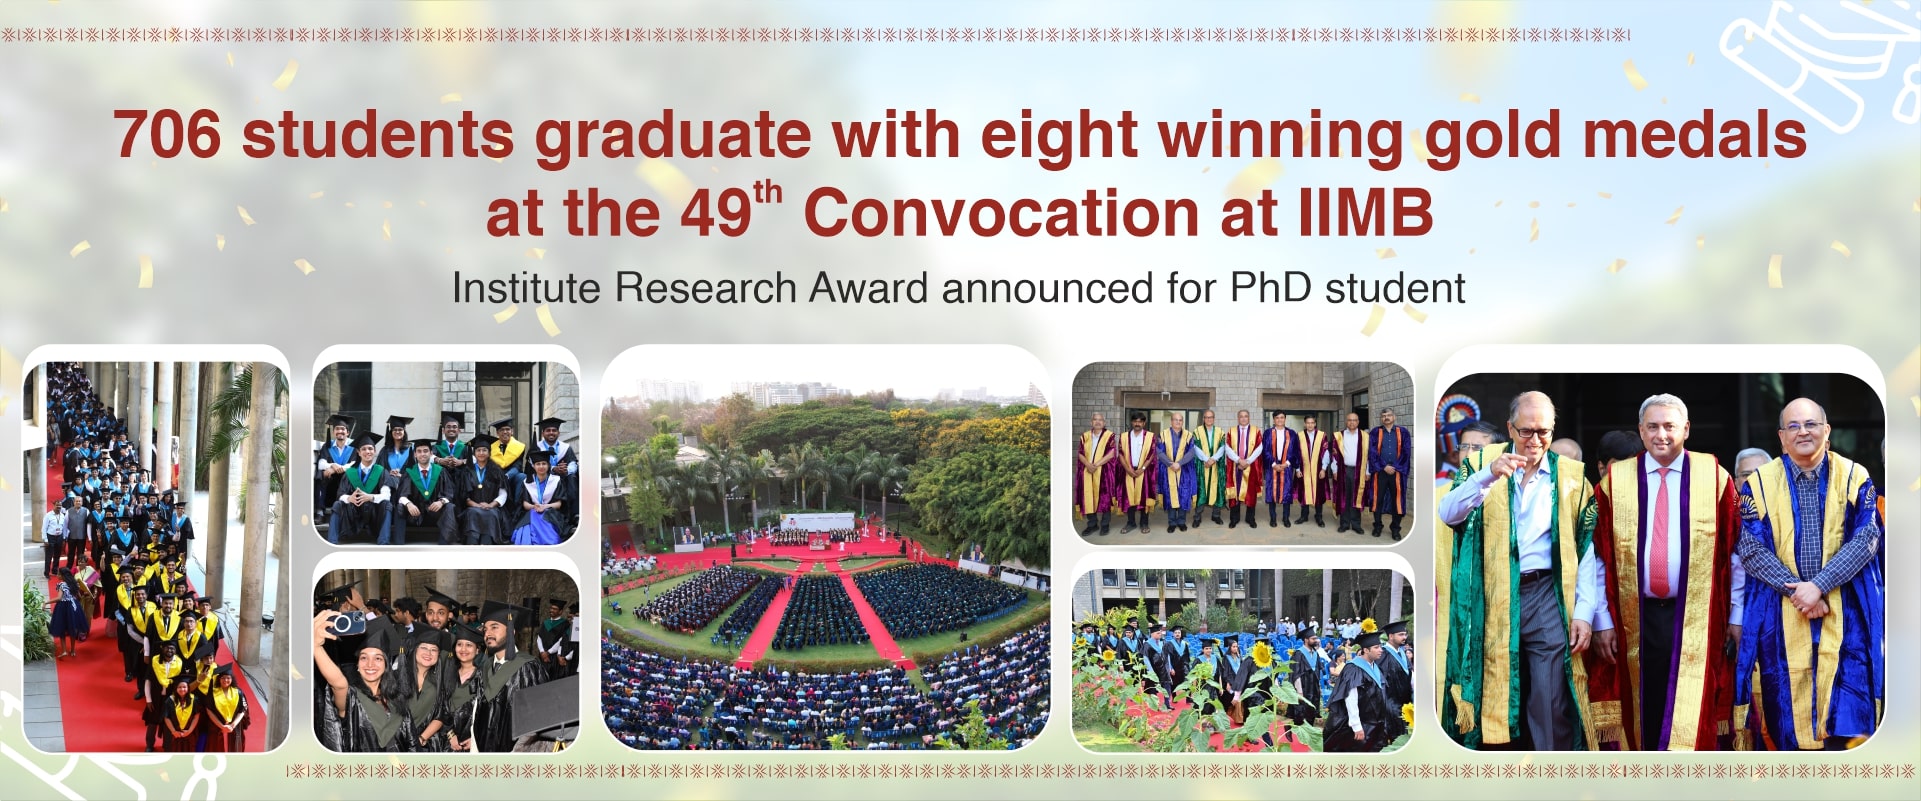 706 students graduate with eight winning gold medals at the 49th Convocation at IIMB 